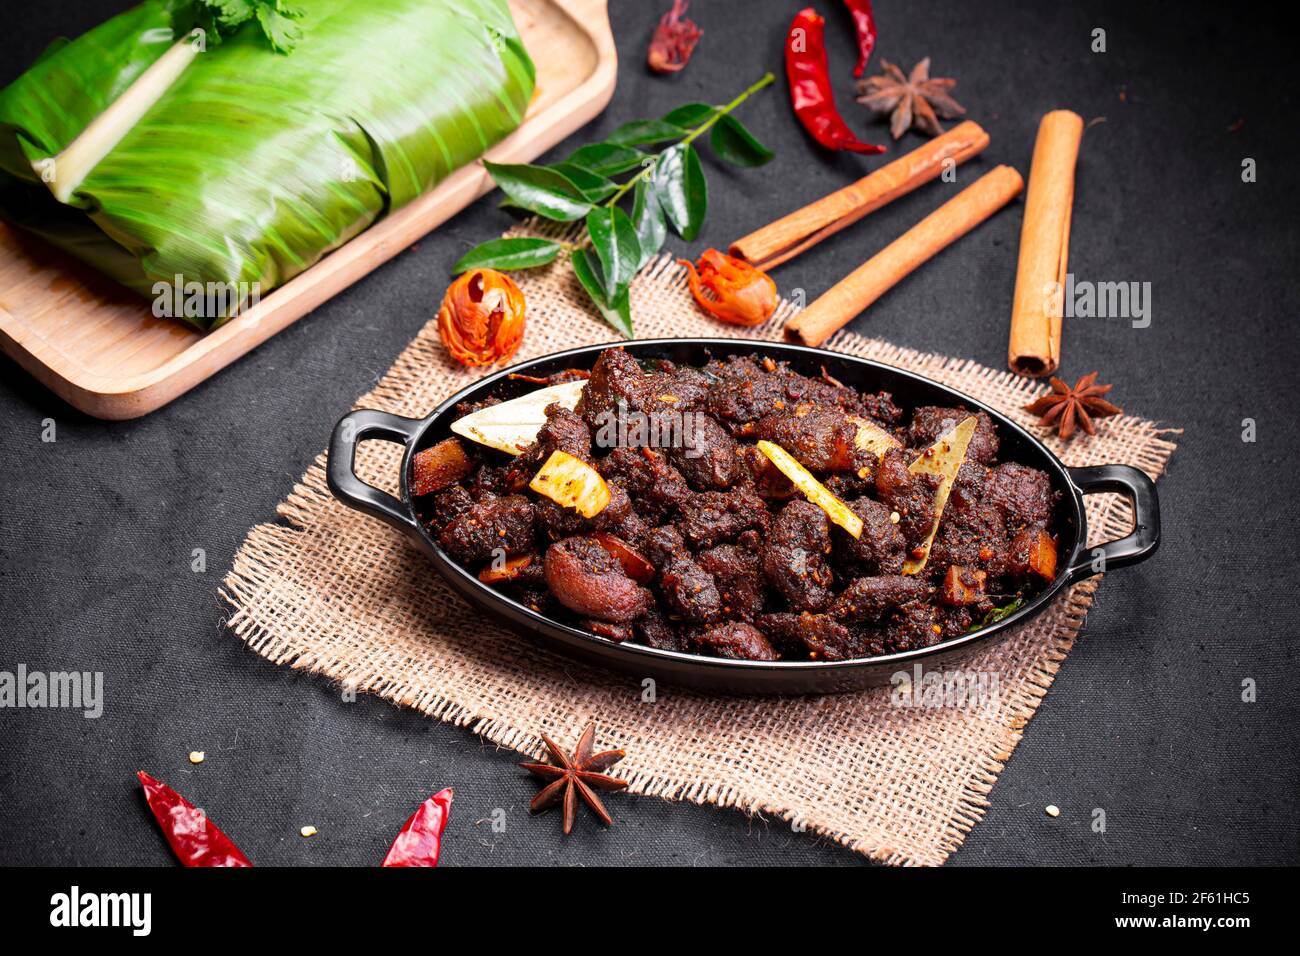 Beef roast or  pothu ulartheyadu, kerala special dish arranged in an black table ware and in banana leaf  in traditional way placed  on a black colour Stock Photo